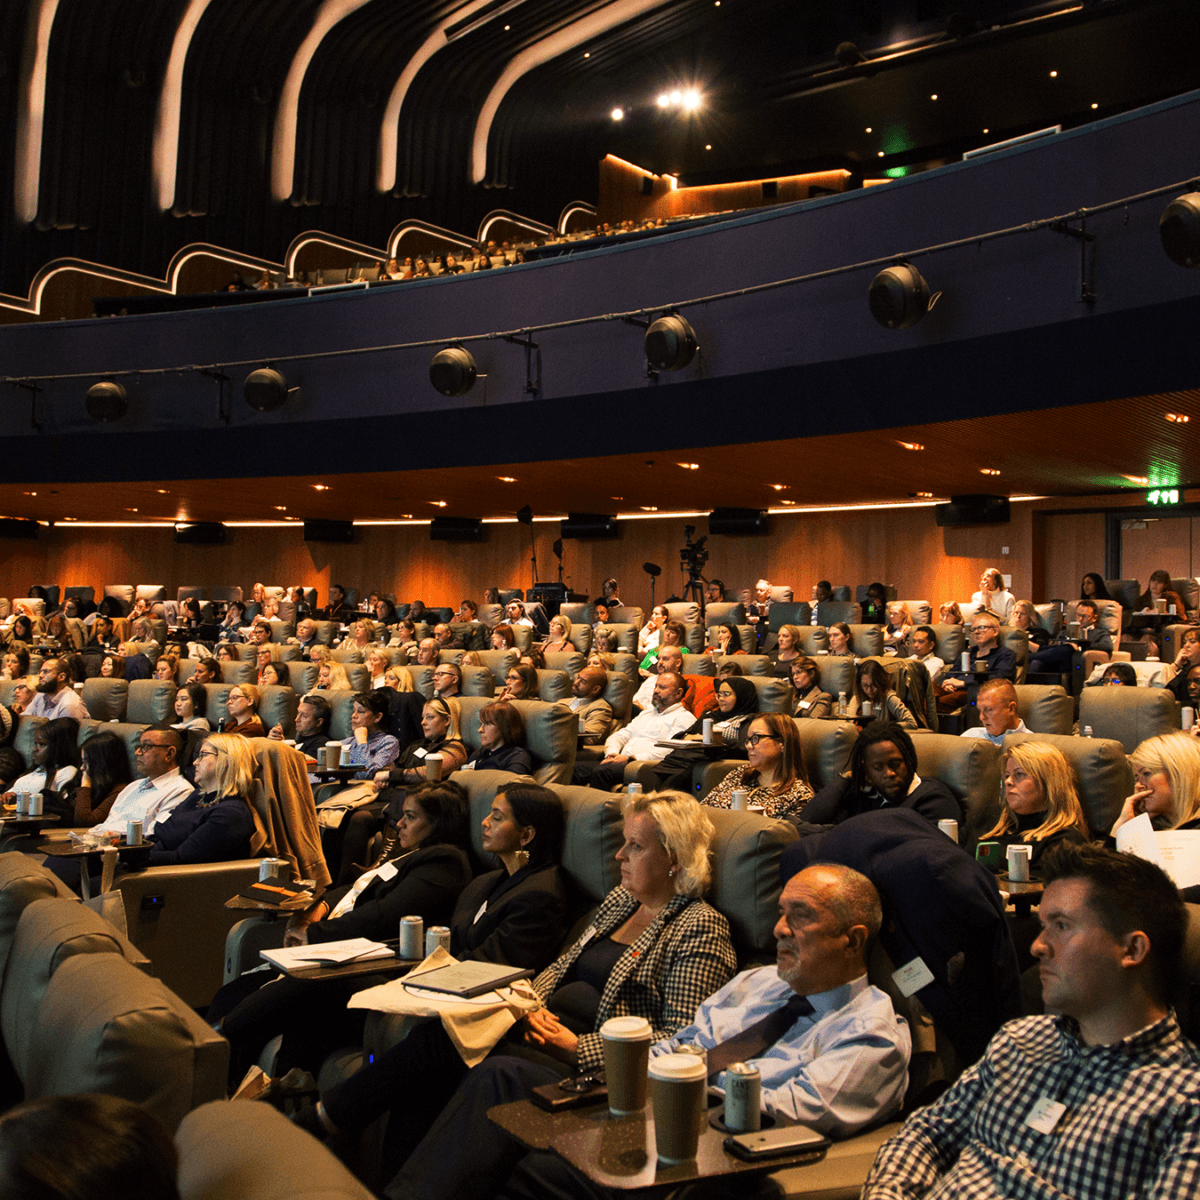 A full auditorium of people in ODEON Leicester Square